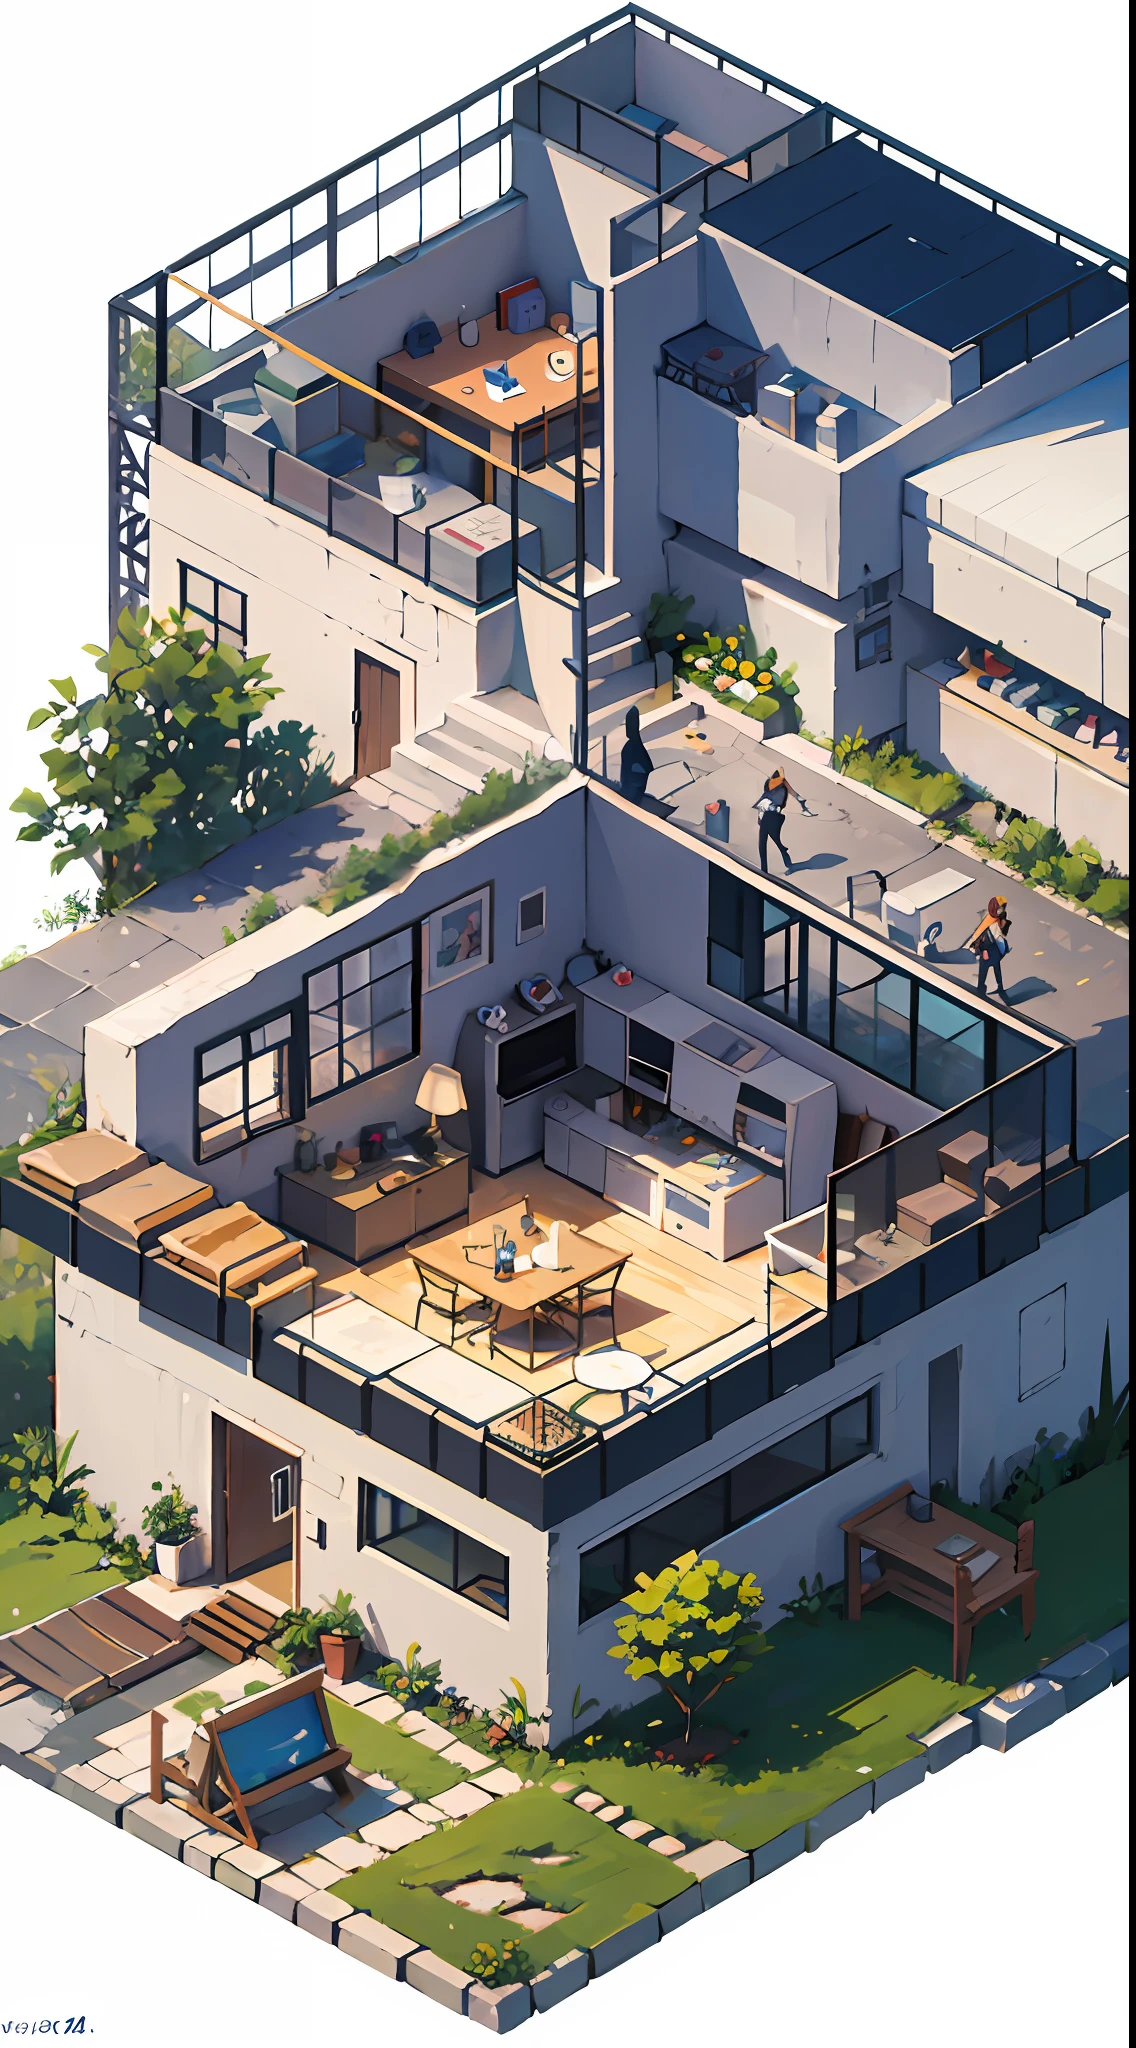 Isometric, overlooking 45 degrees,  SLG game building, single building,